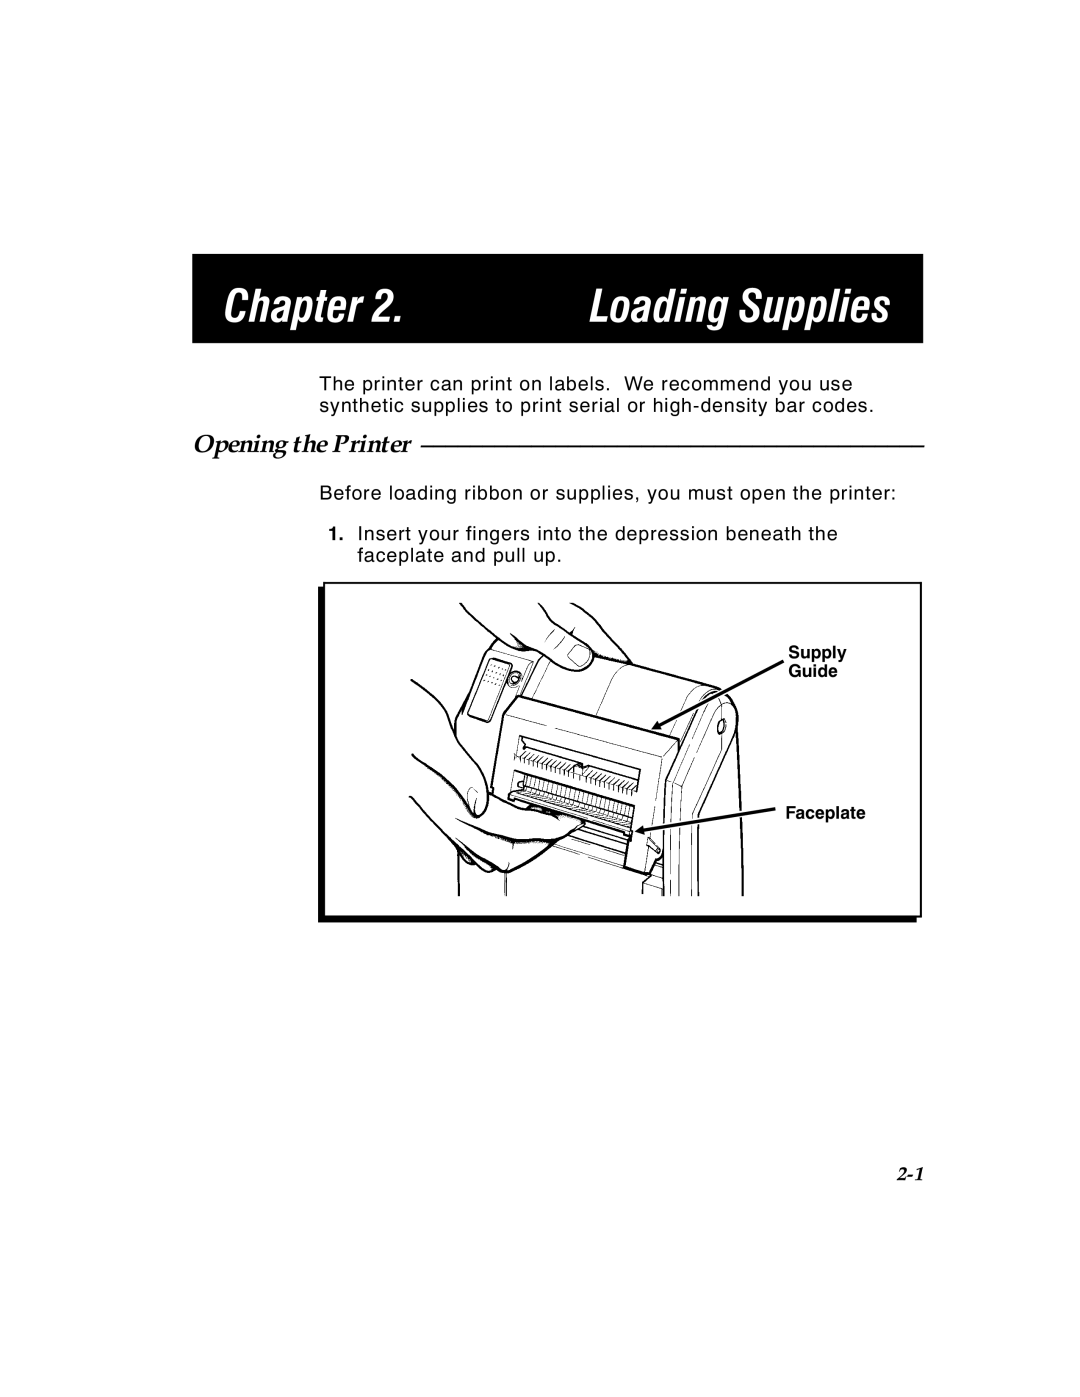 Paxar 4 manual Loading Supplies, Opening the Printer, Chapter 